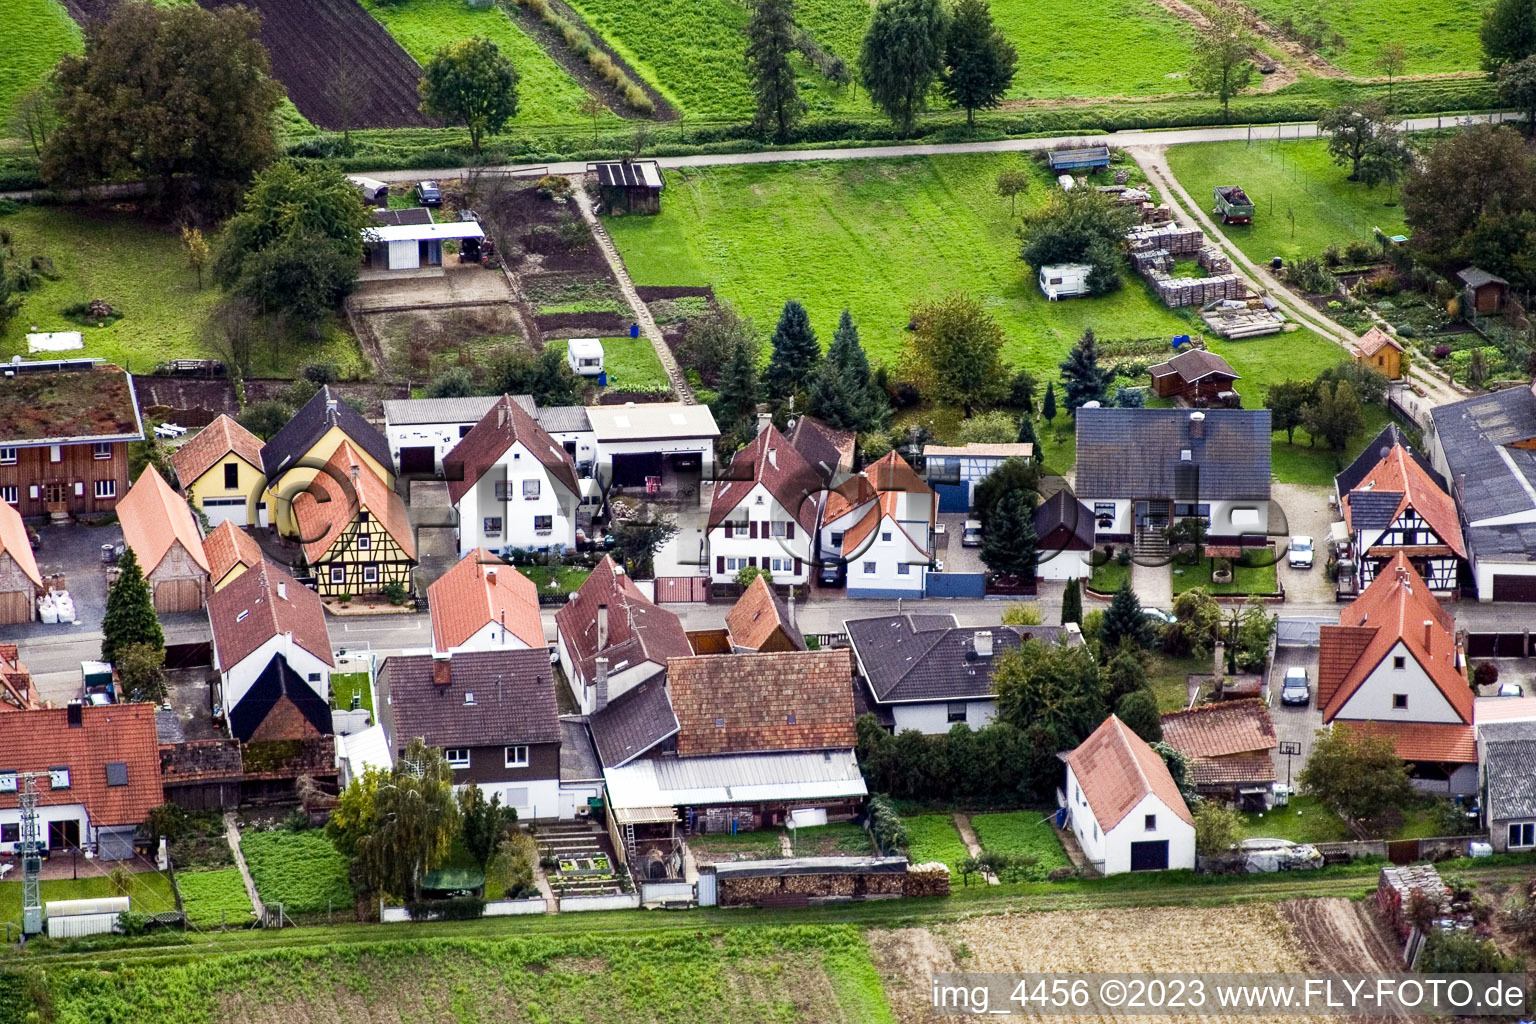 Drone recording of Gänsried in Freckenfeld in the state Rhineland-Palatinate, Germany